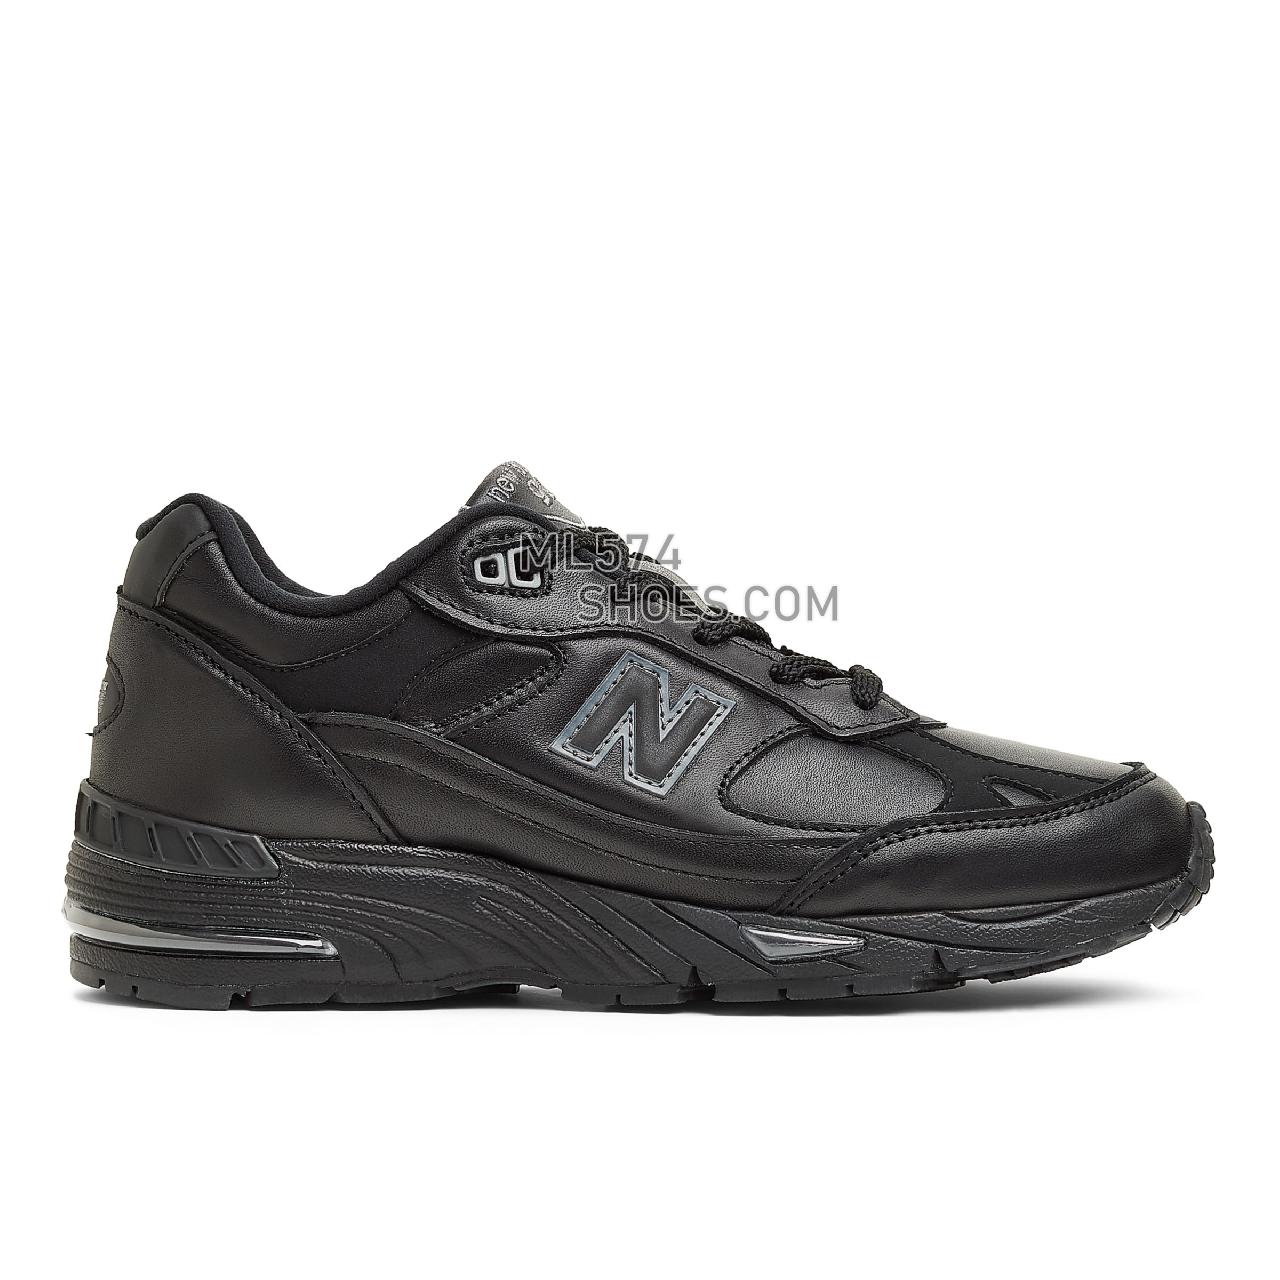 New Balance Made in UK 991 - Women's Made in USA And UK Sneakers - Black with Grey - W991TK